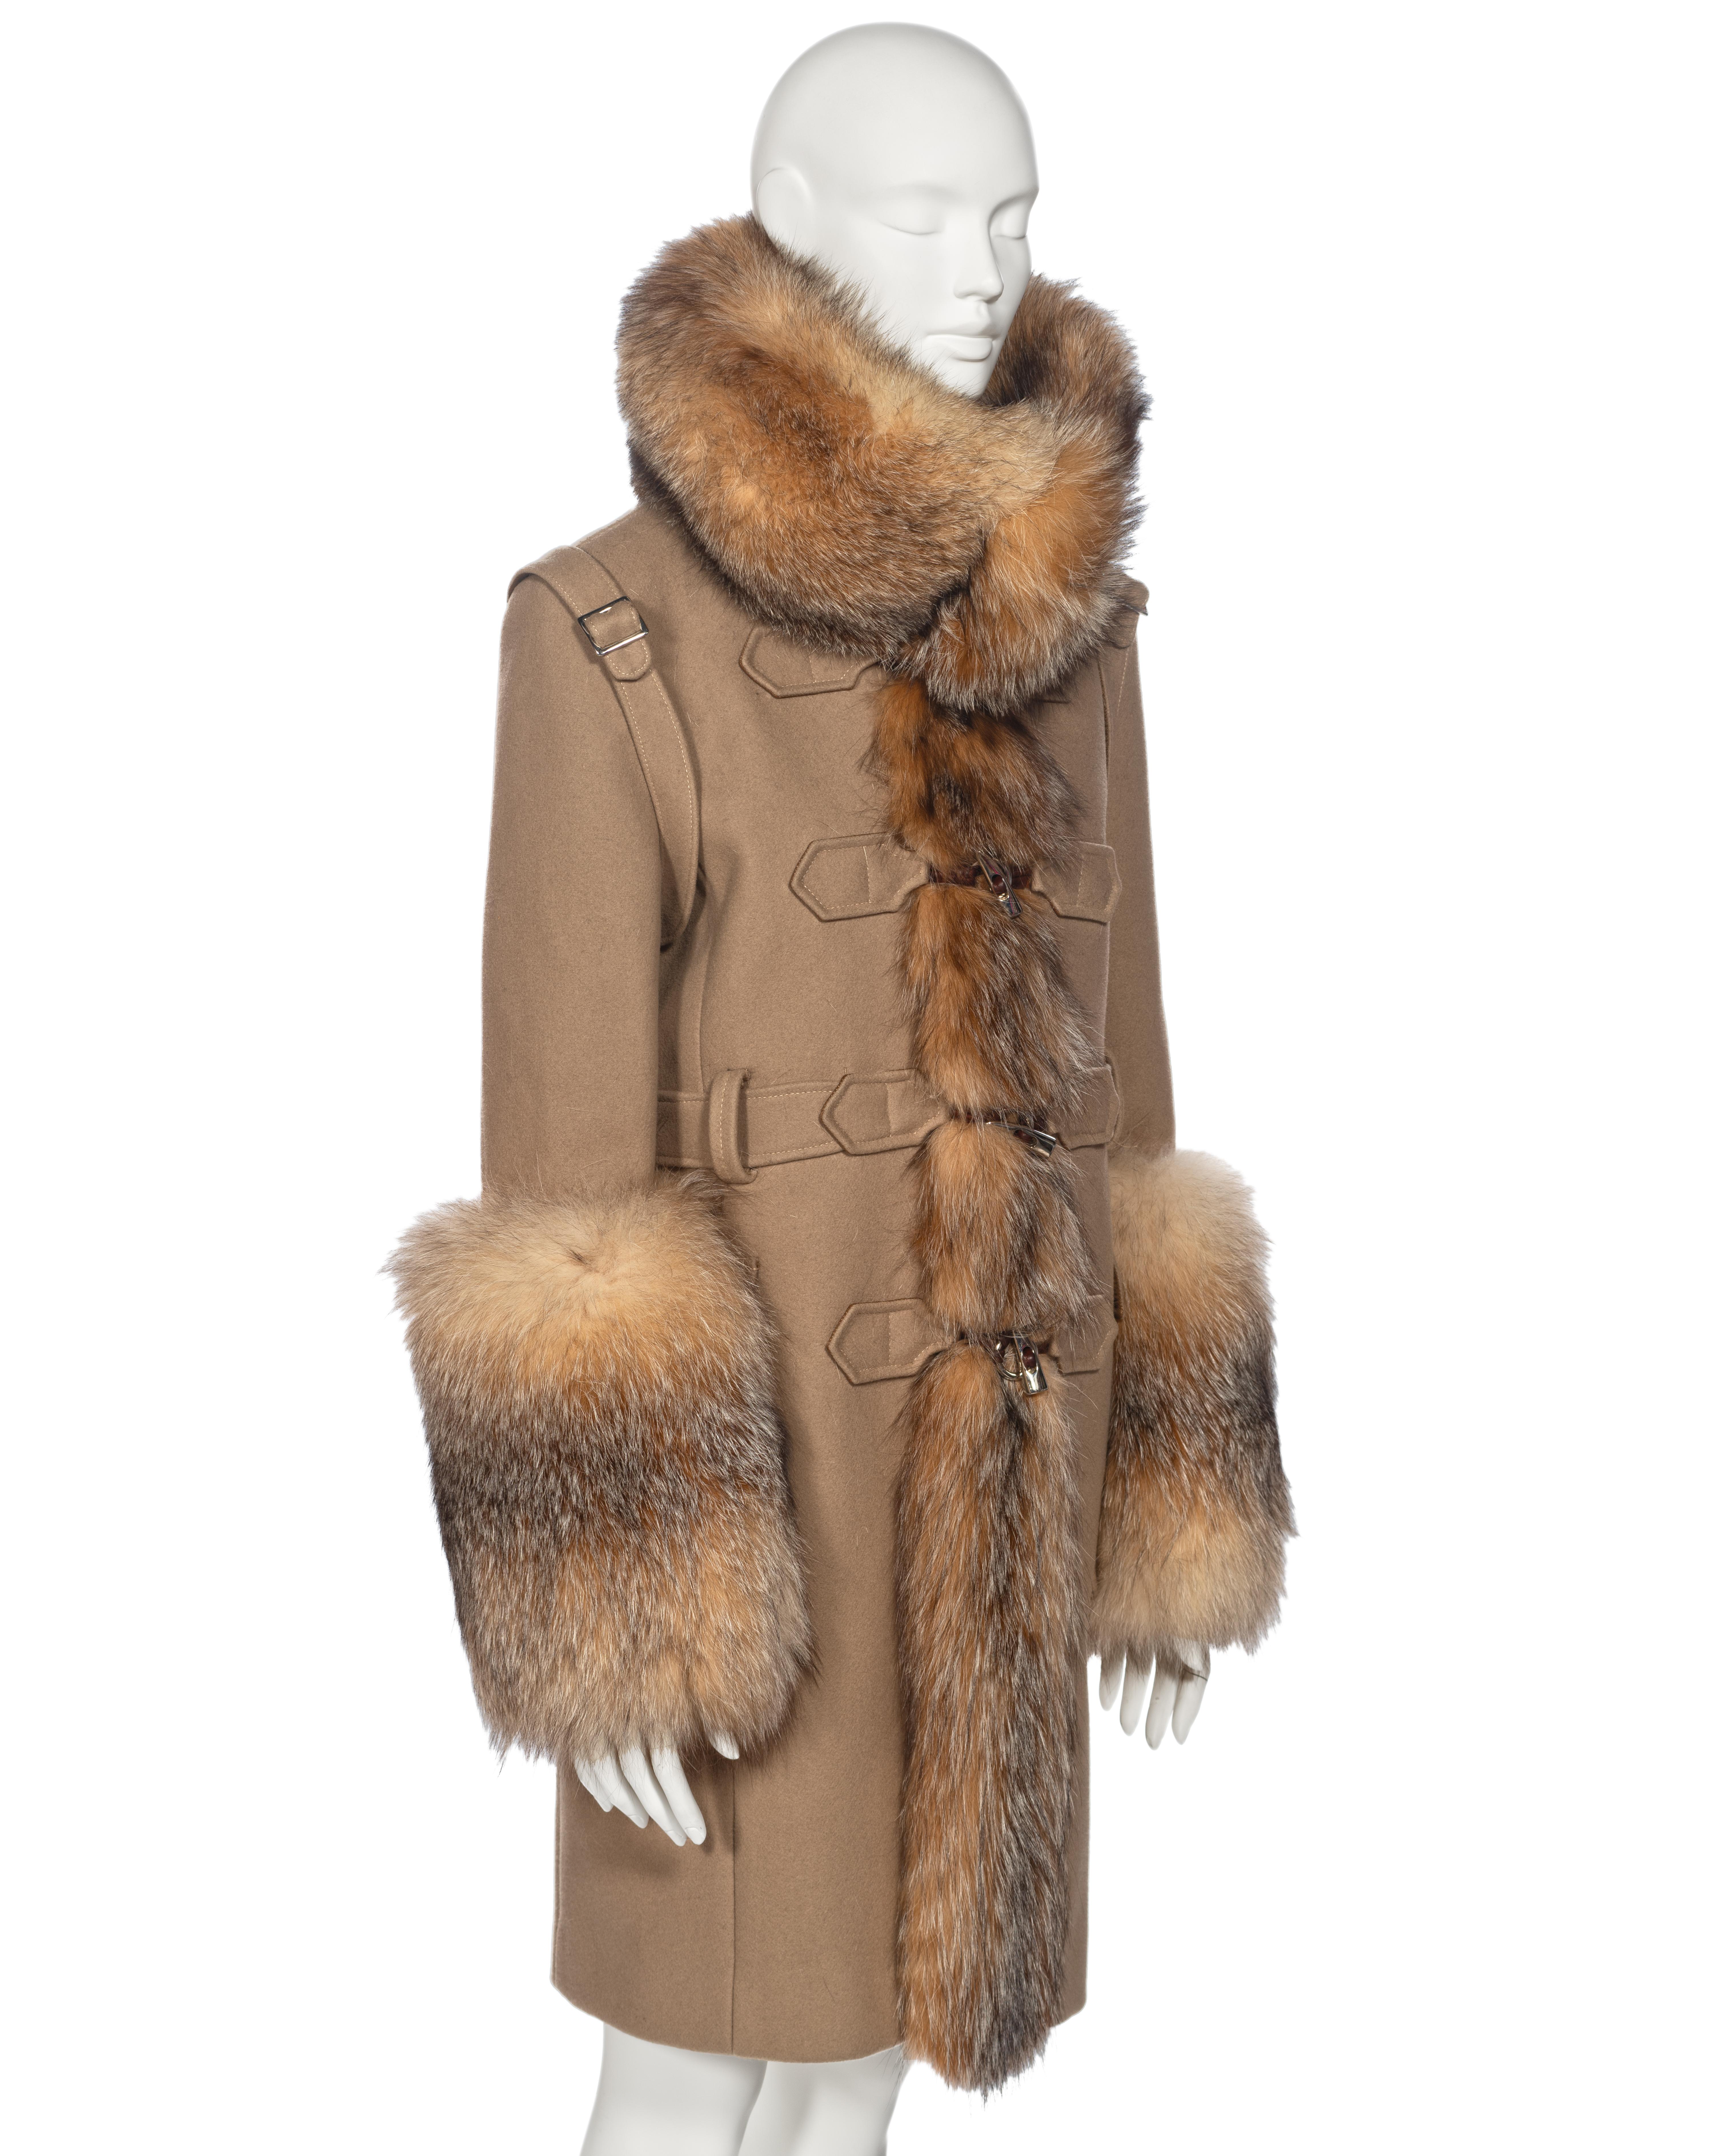 Balenciaga by Nicolas Ghesquière Fur-Trimmed Felted Wool Duffle Coat, fw 2005 For Sale 3